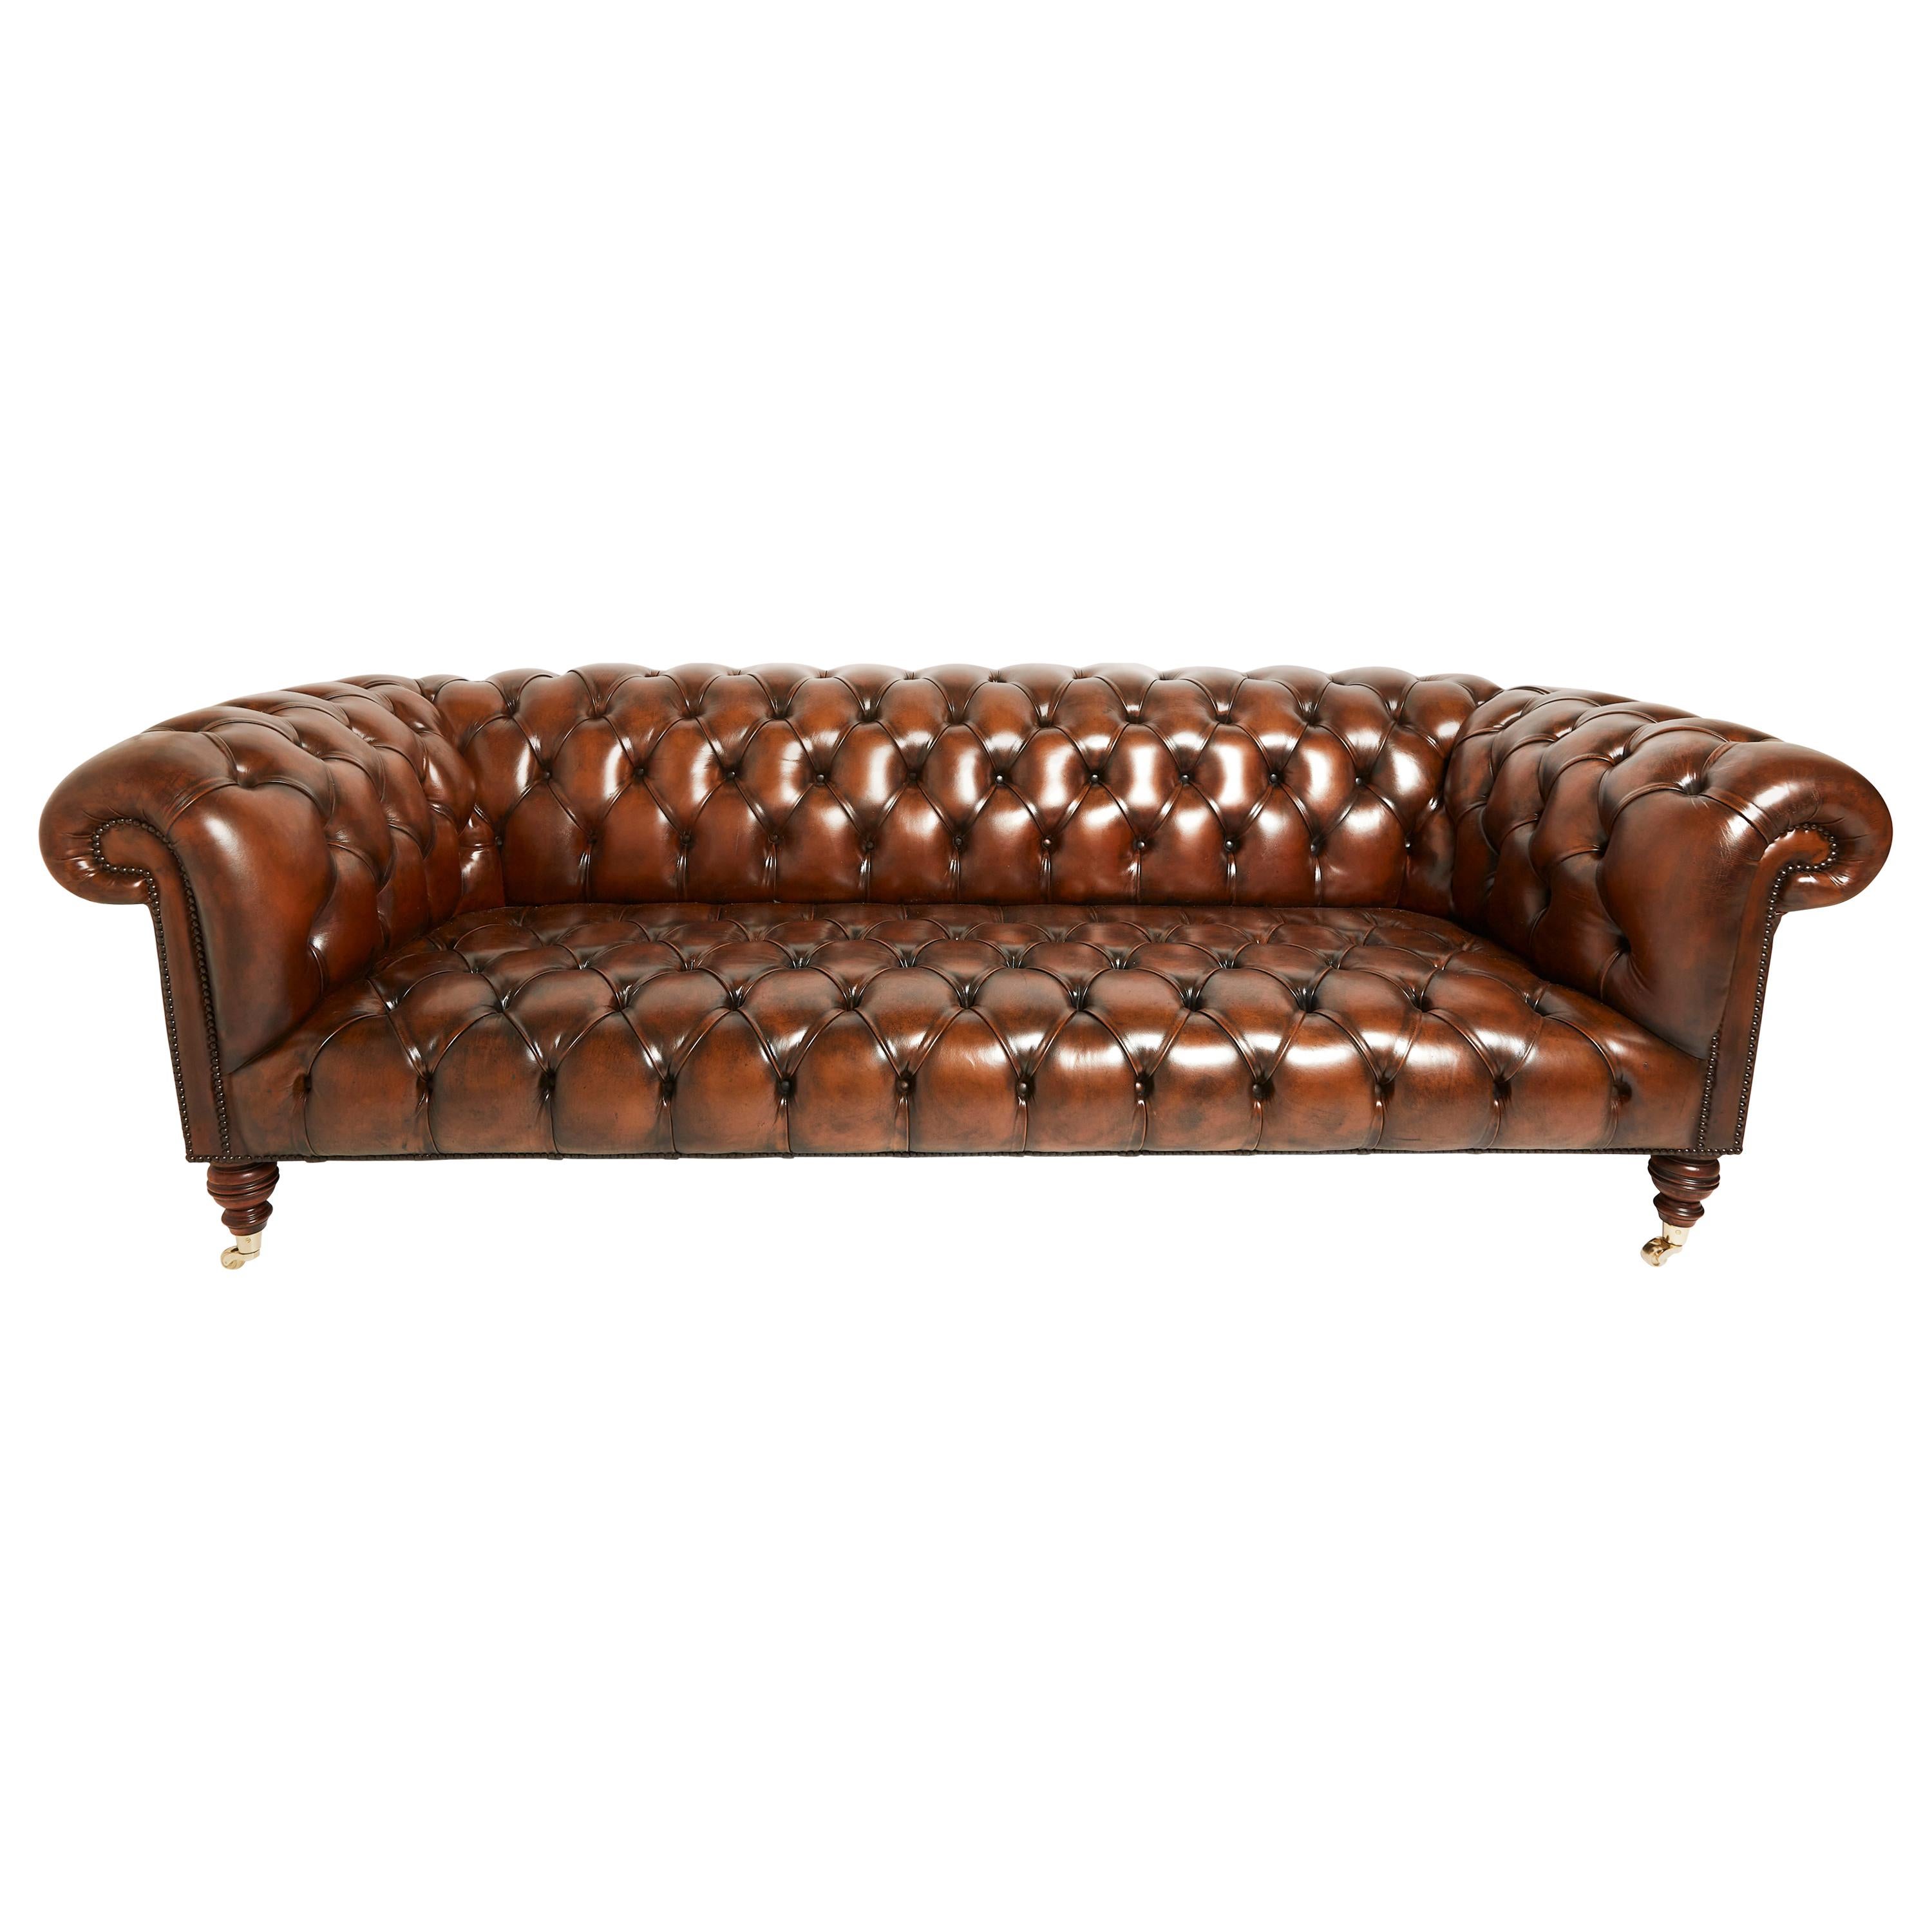 Superb Quality Classic English Chesterfield Sofa at 1stDibs